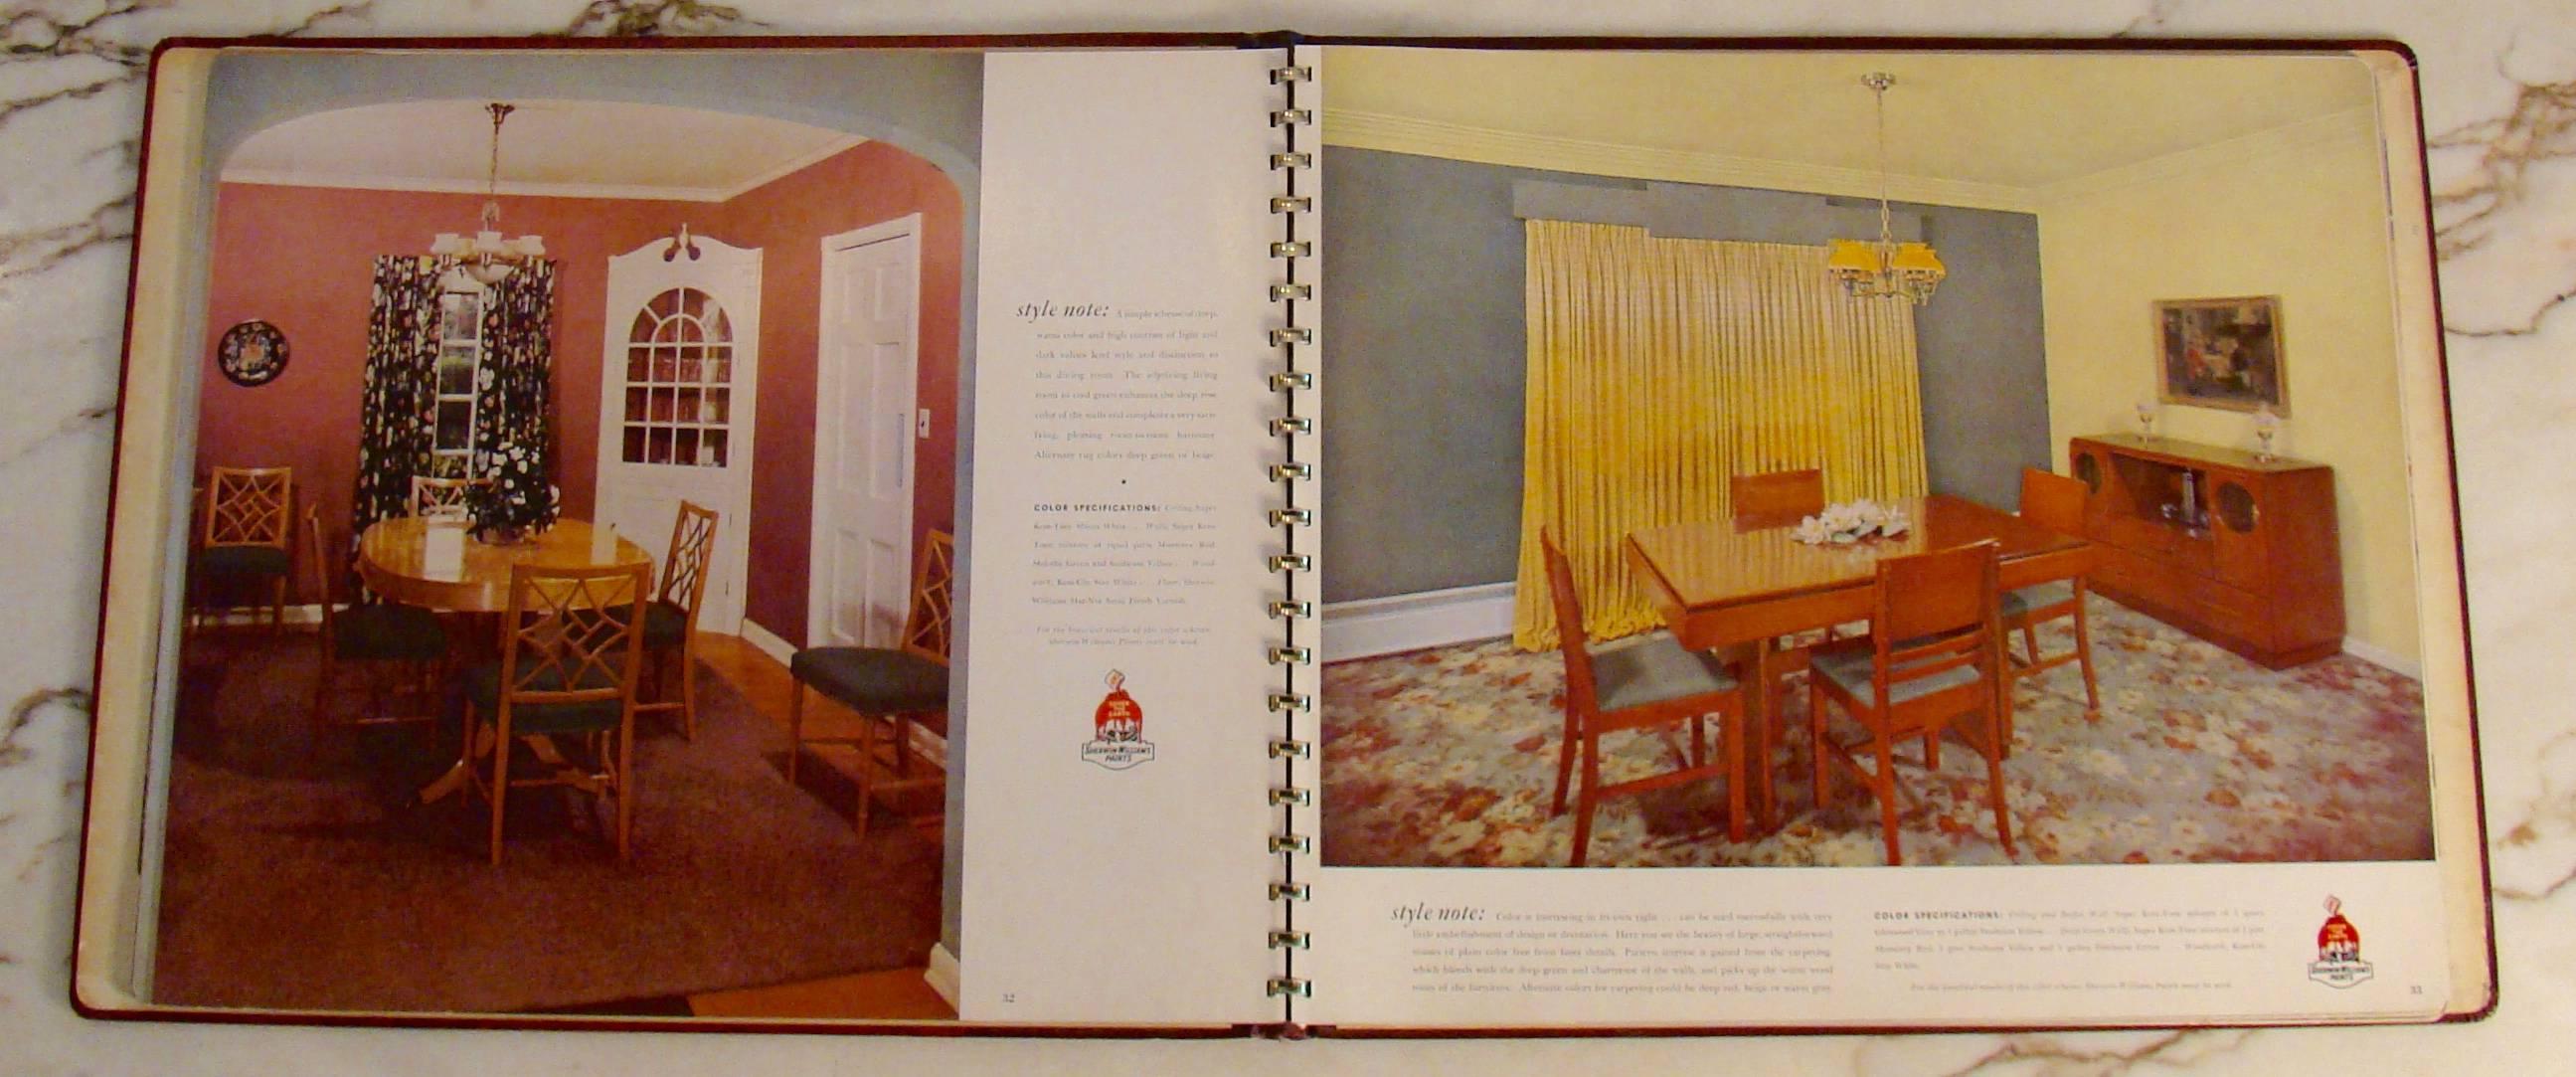 Wonderful coffee table book from the 1950s with interior decorating and paint options for your home.